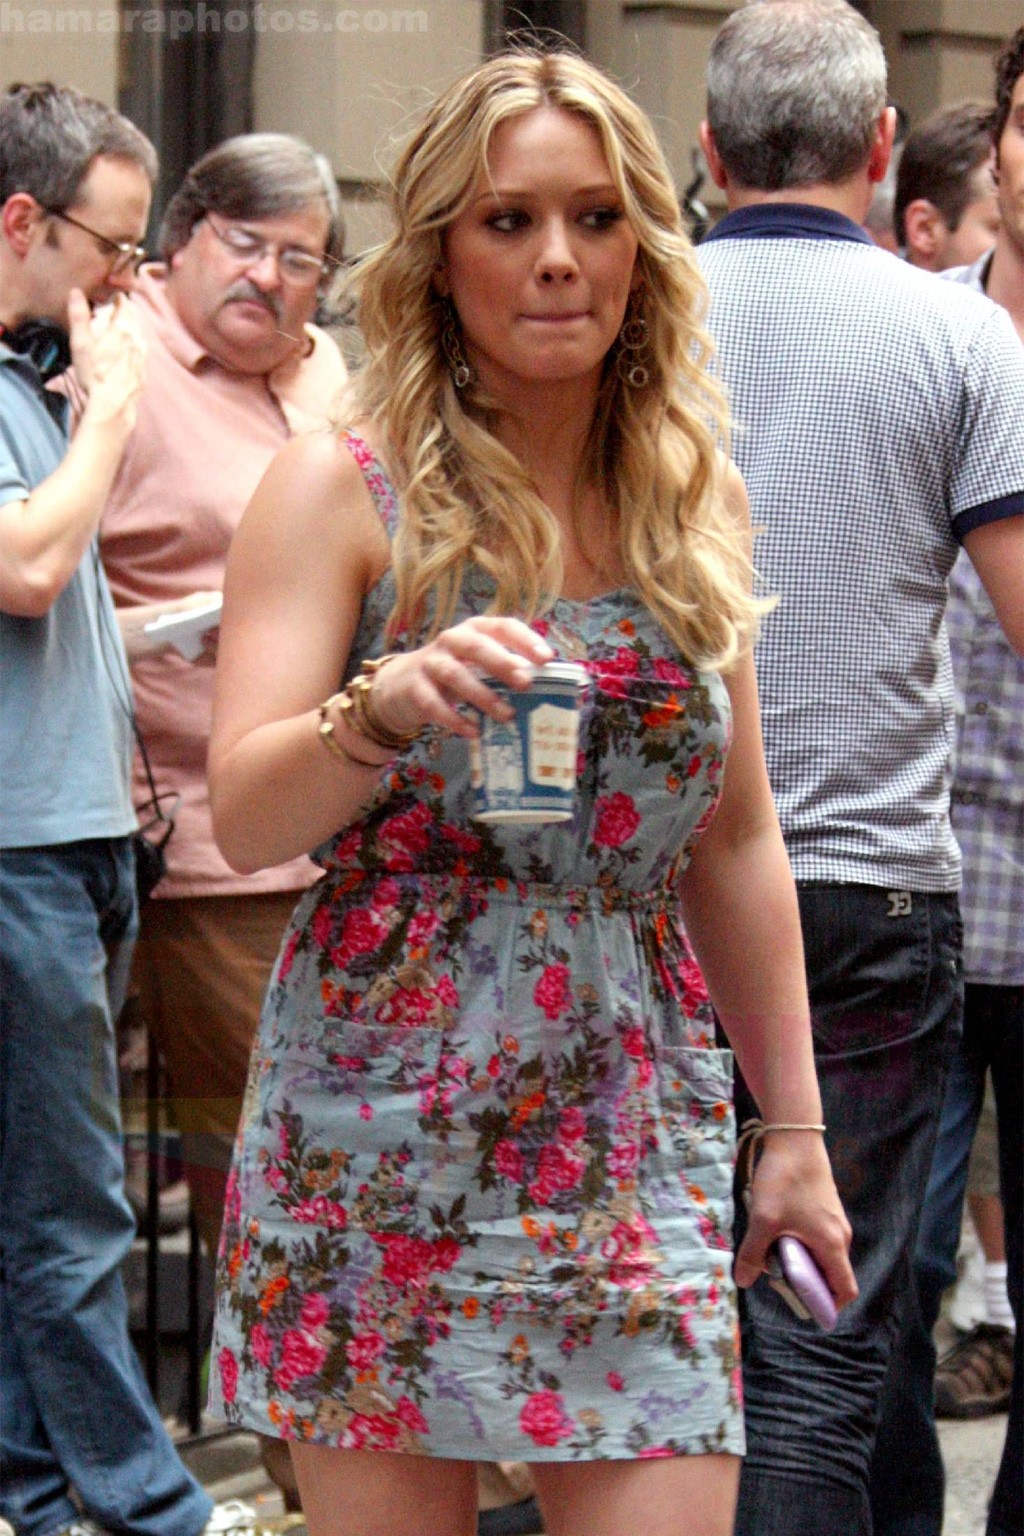 Hilary Duff On The Set Of GOSSIP GIRL in New York City on 26th August 2009 